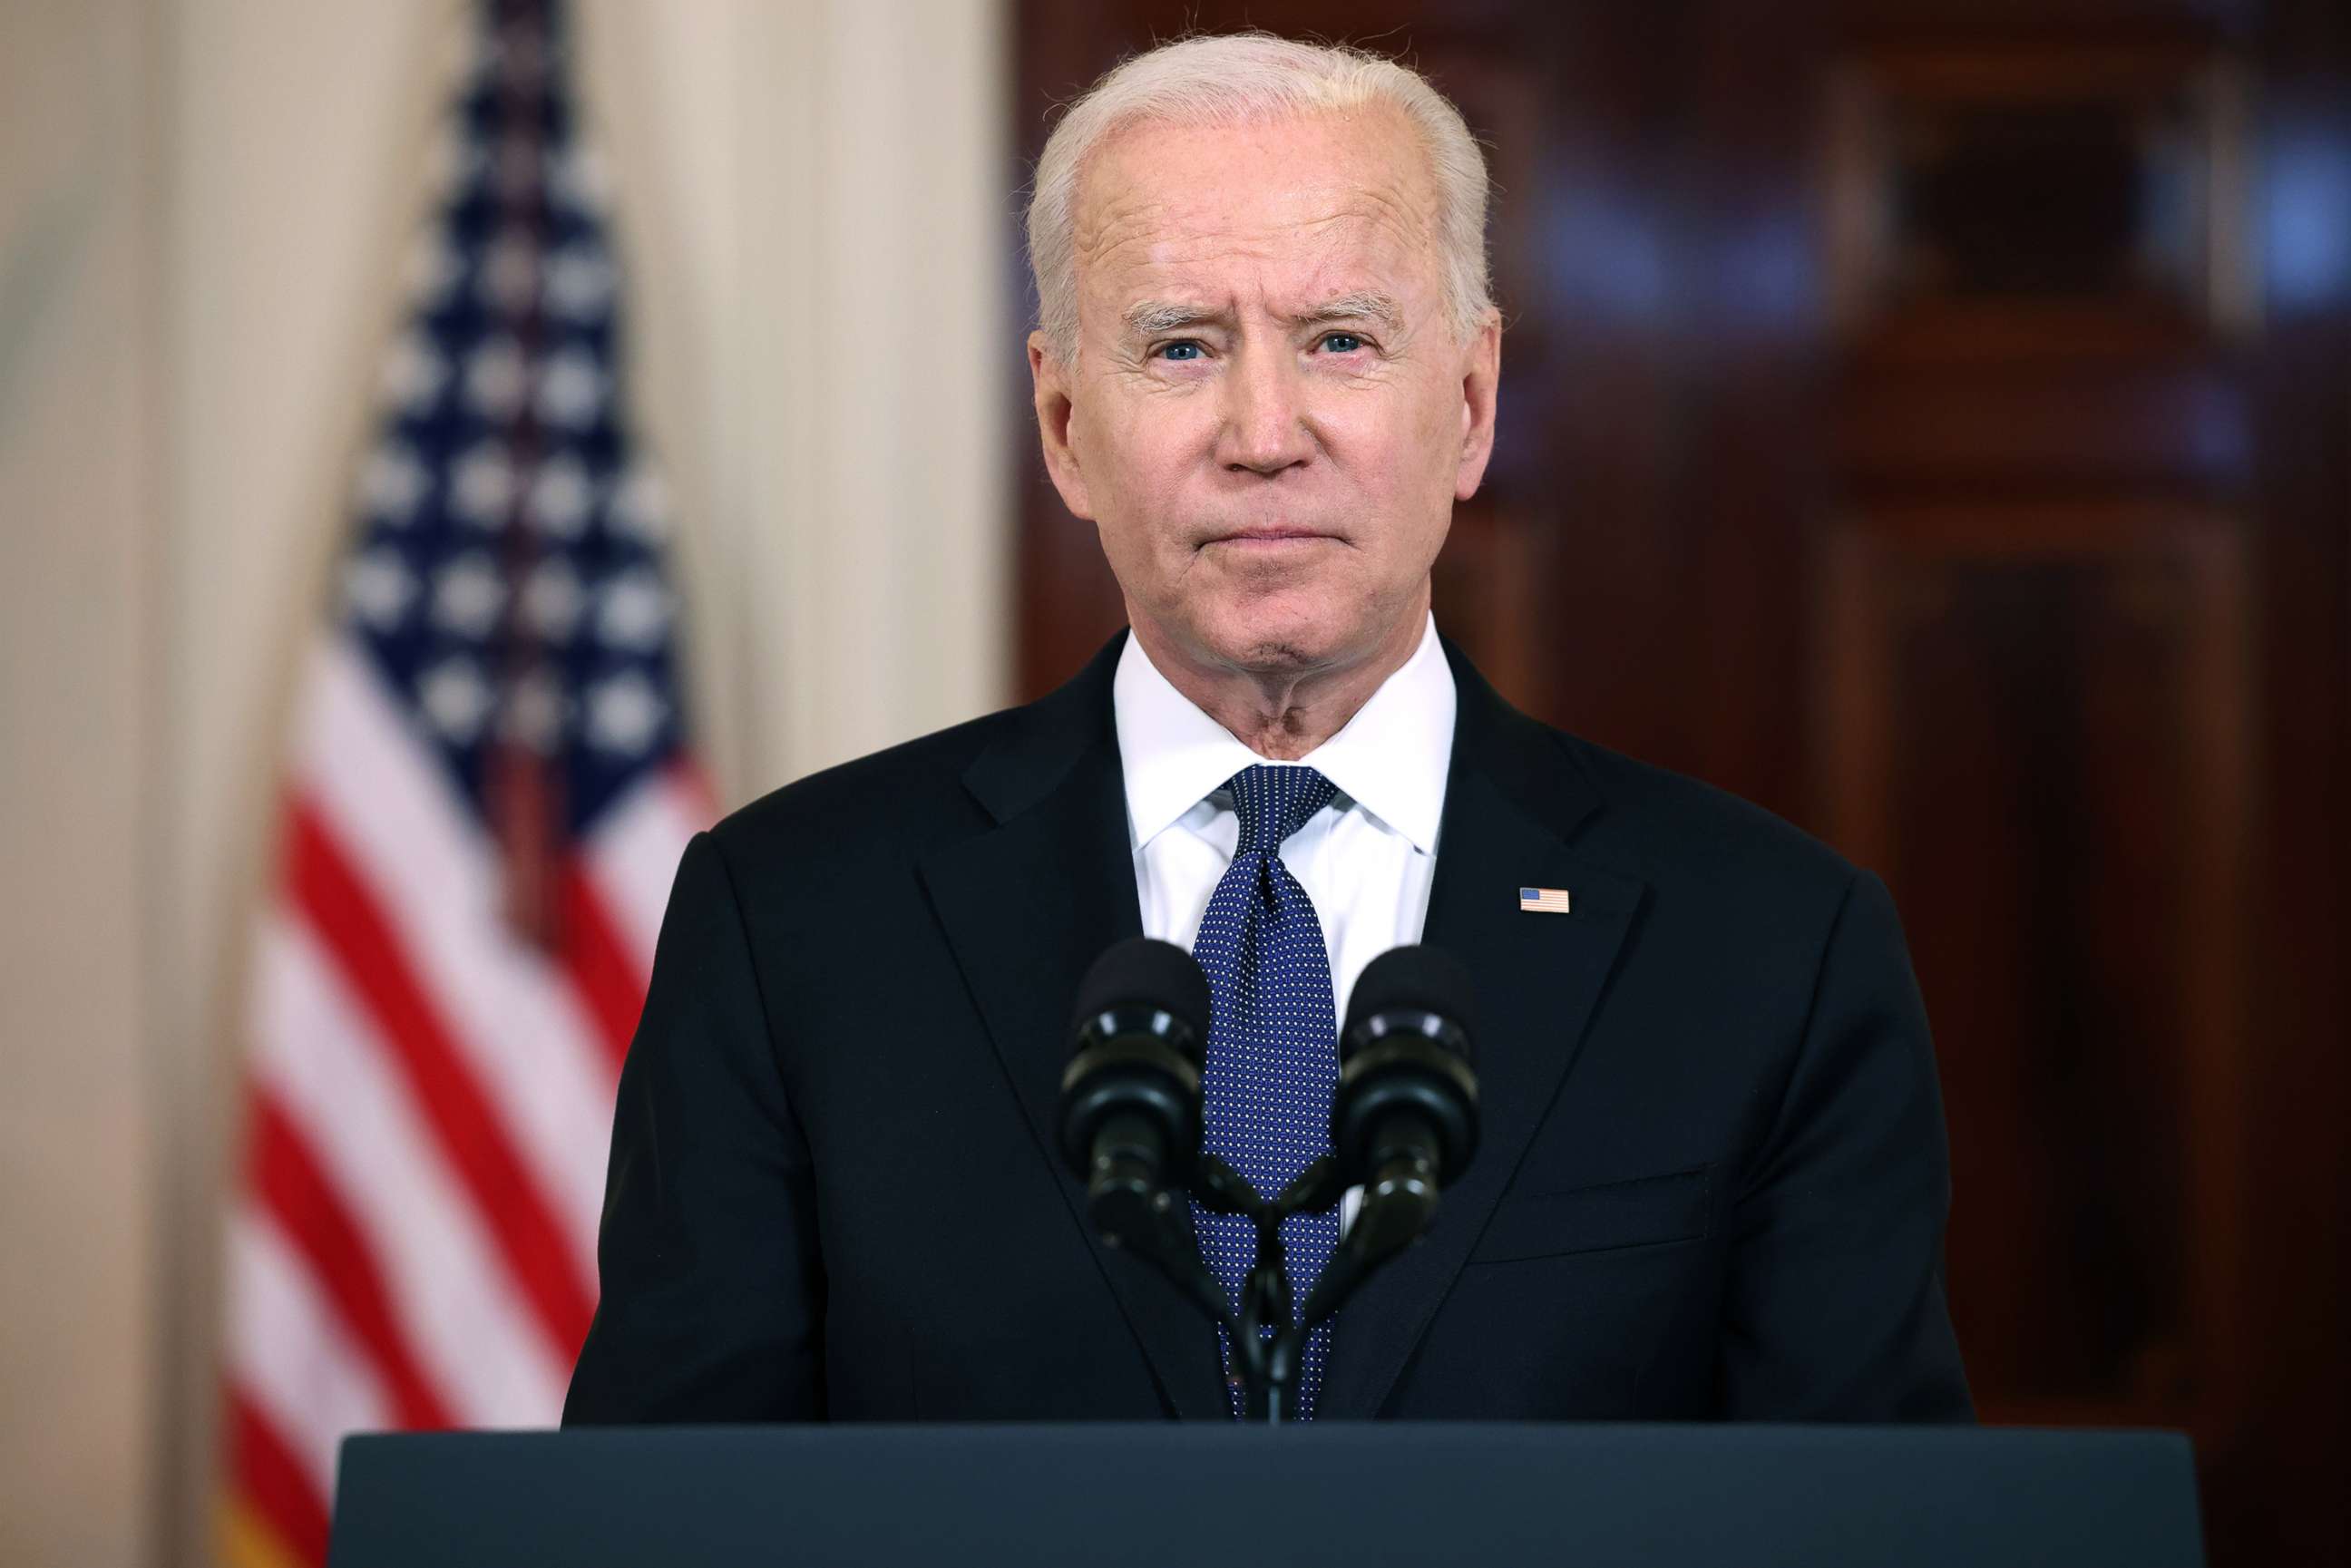 PHOTO: President Joe Biden delivers remarks from the Cross Hall at the White House, May 20, 2021.